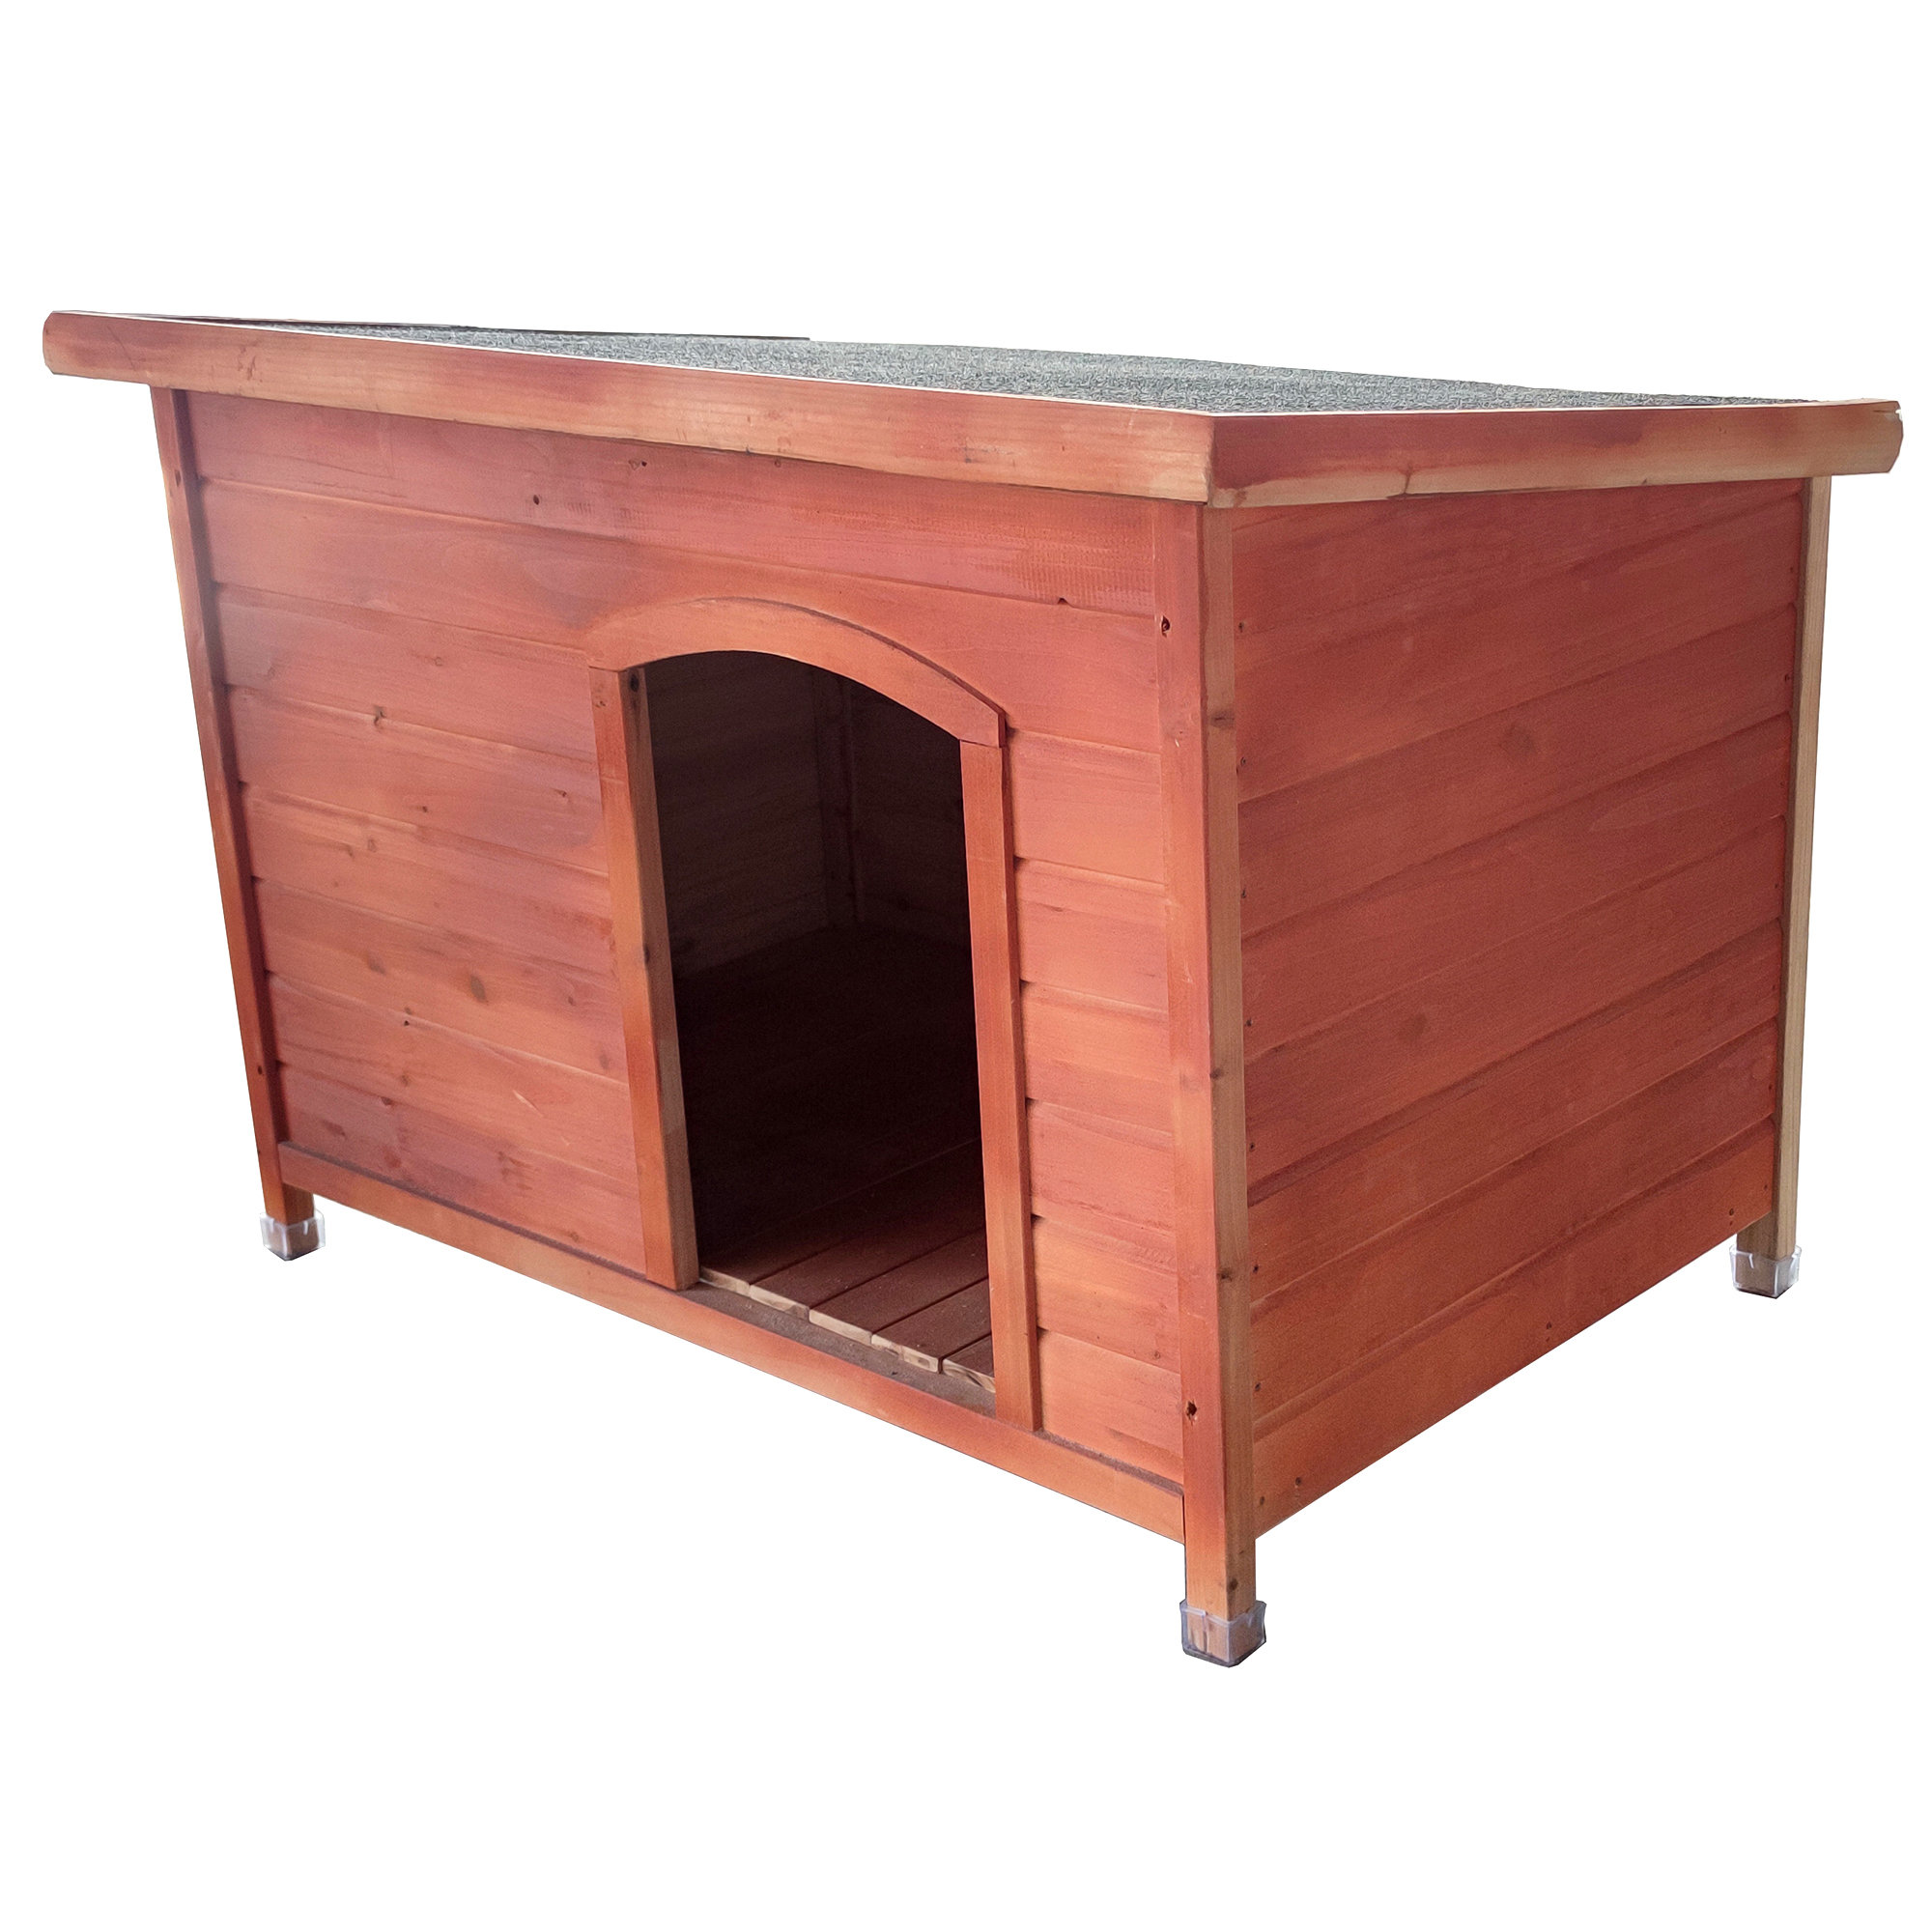 Solid Wood Pet House